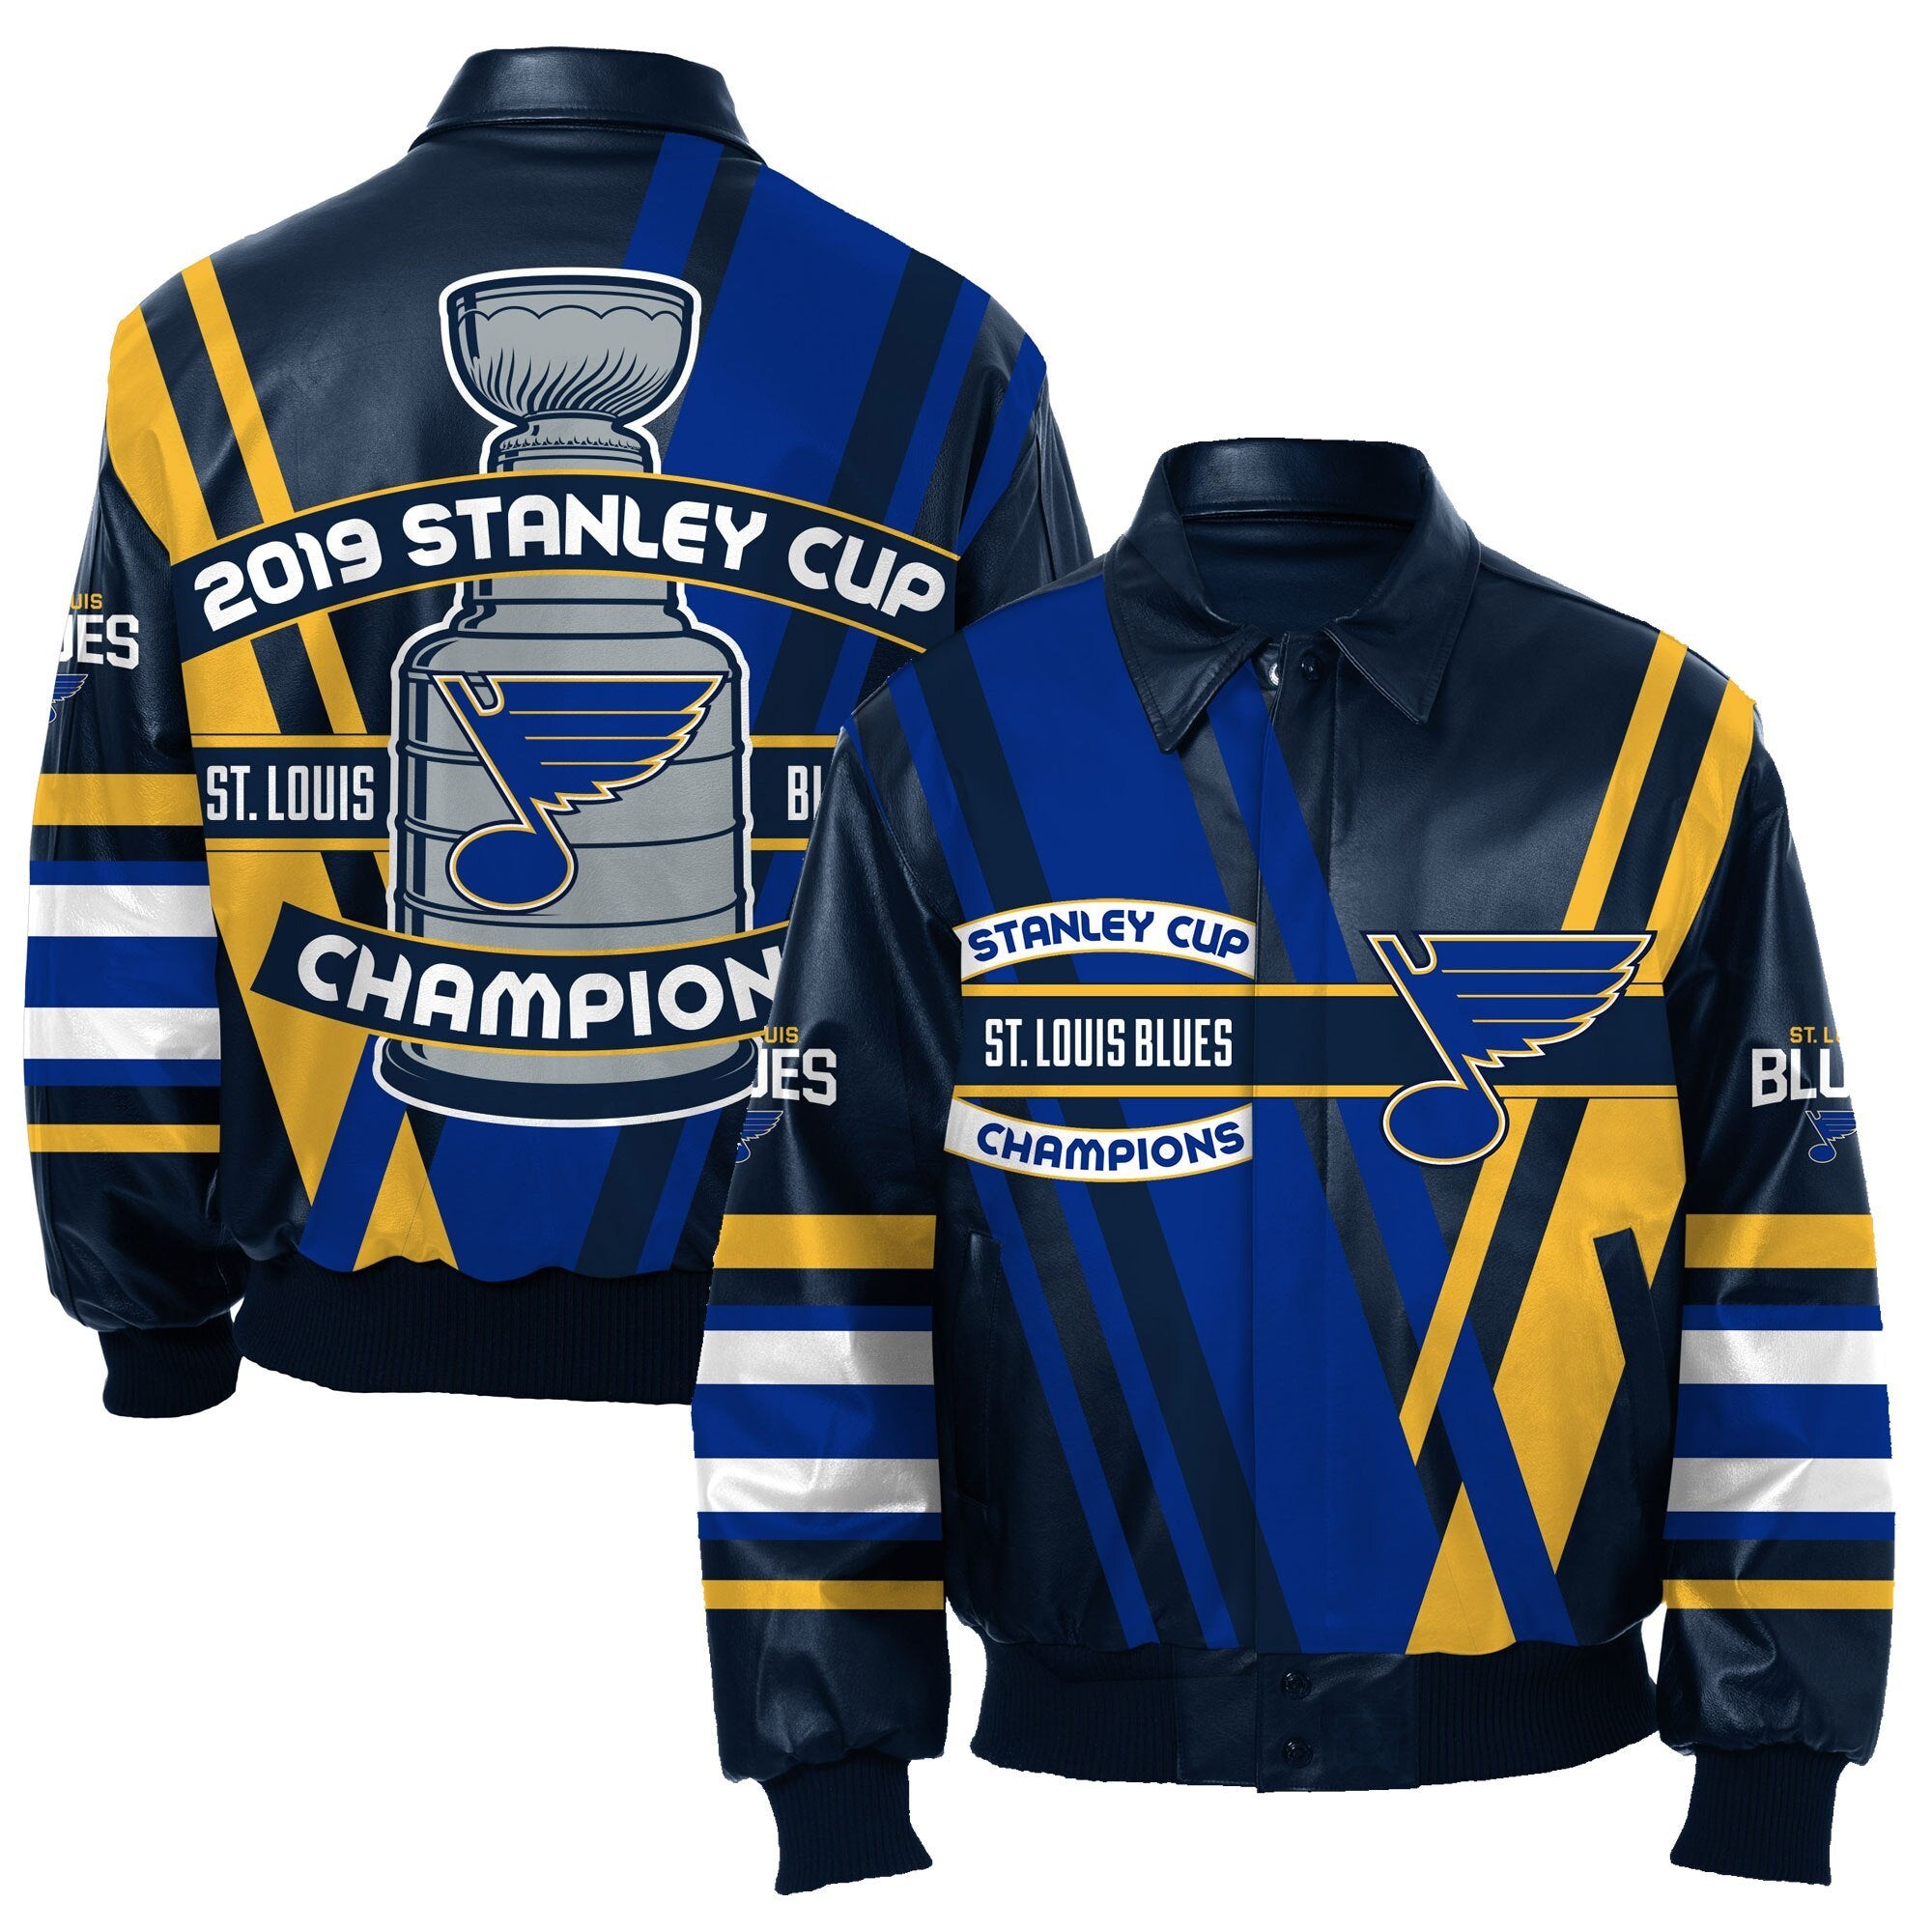 St. Louis Blues 2019 Stanley Cup Champions Nappa Leather Jacket